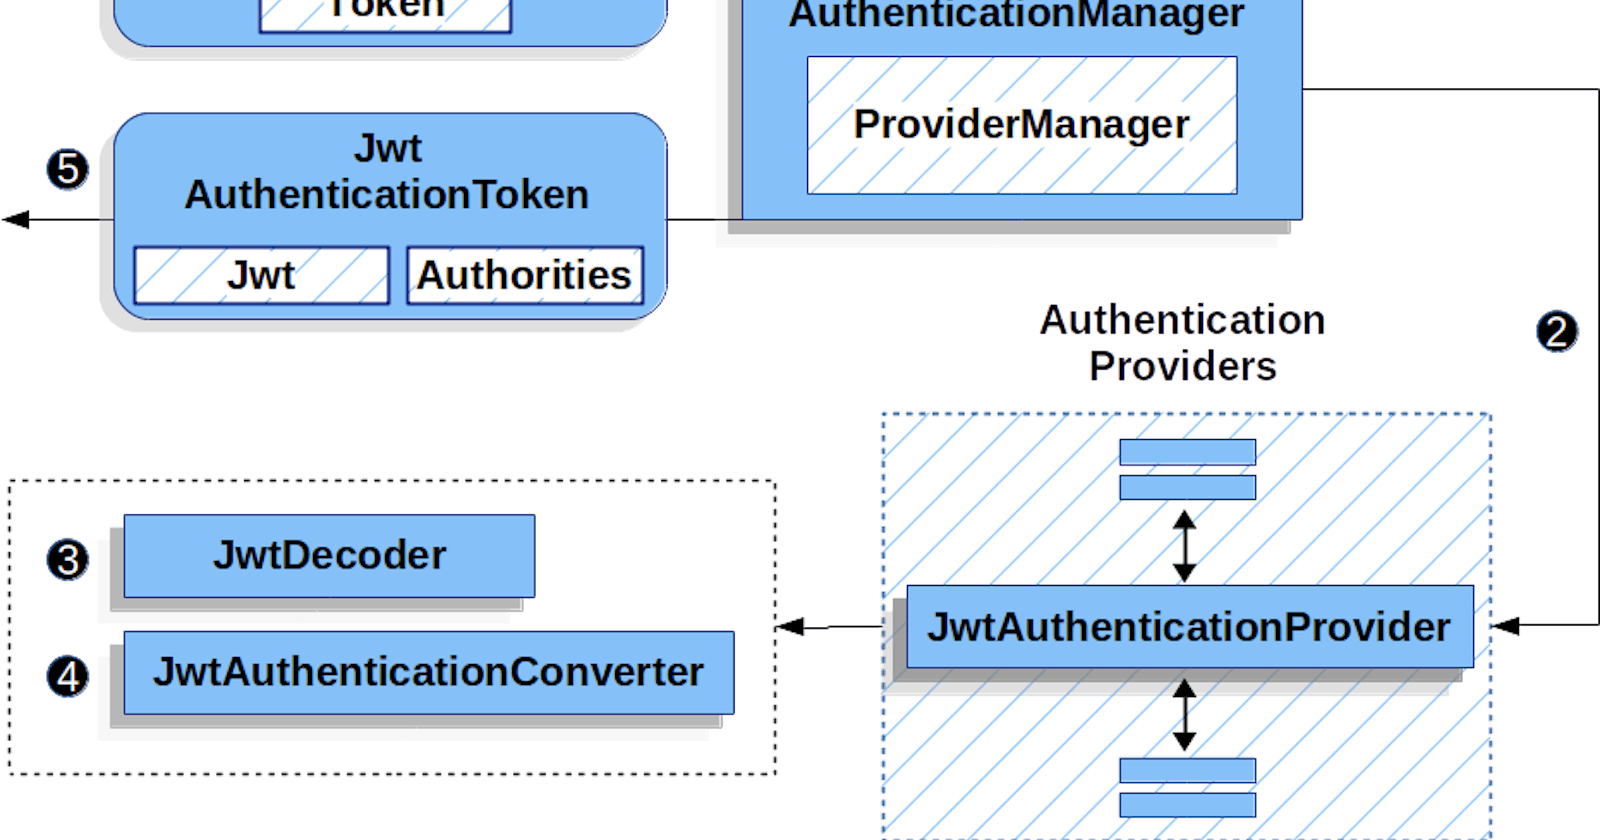 1. Getting Your Spring Rest Project Started with JWT Authentication